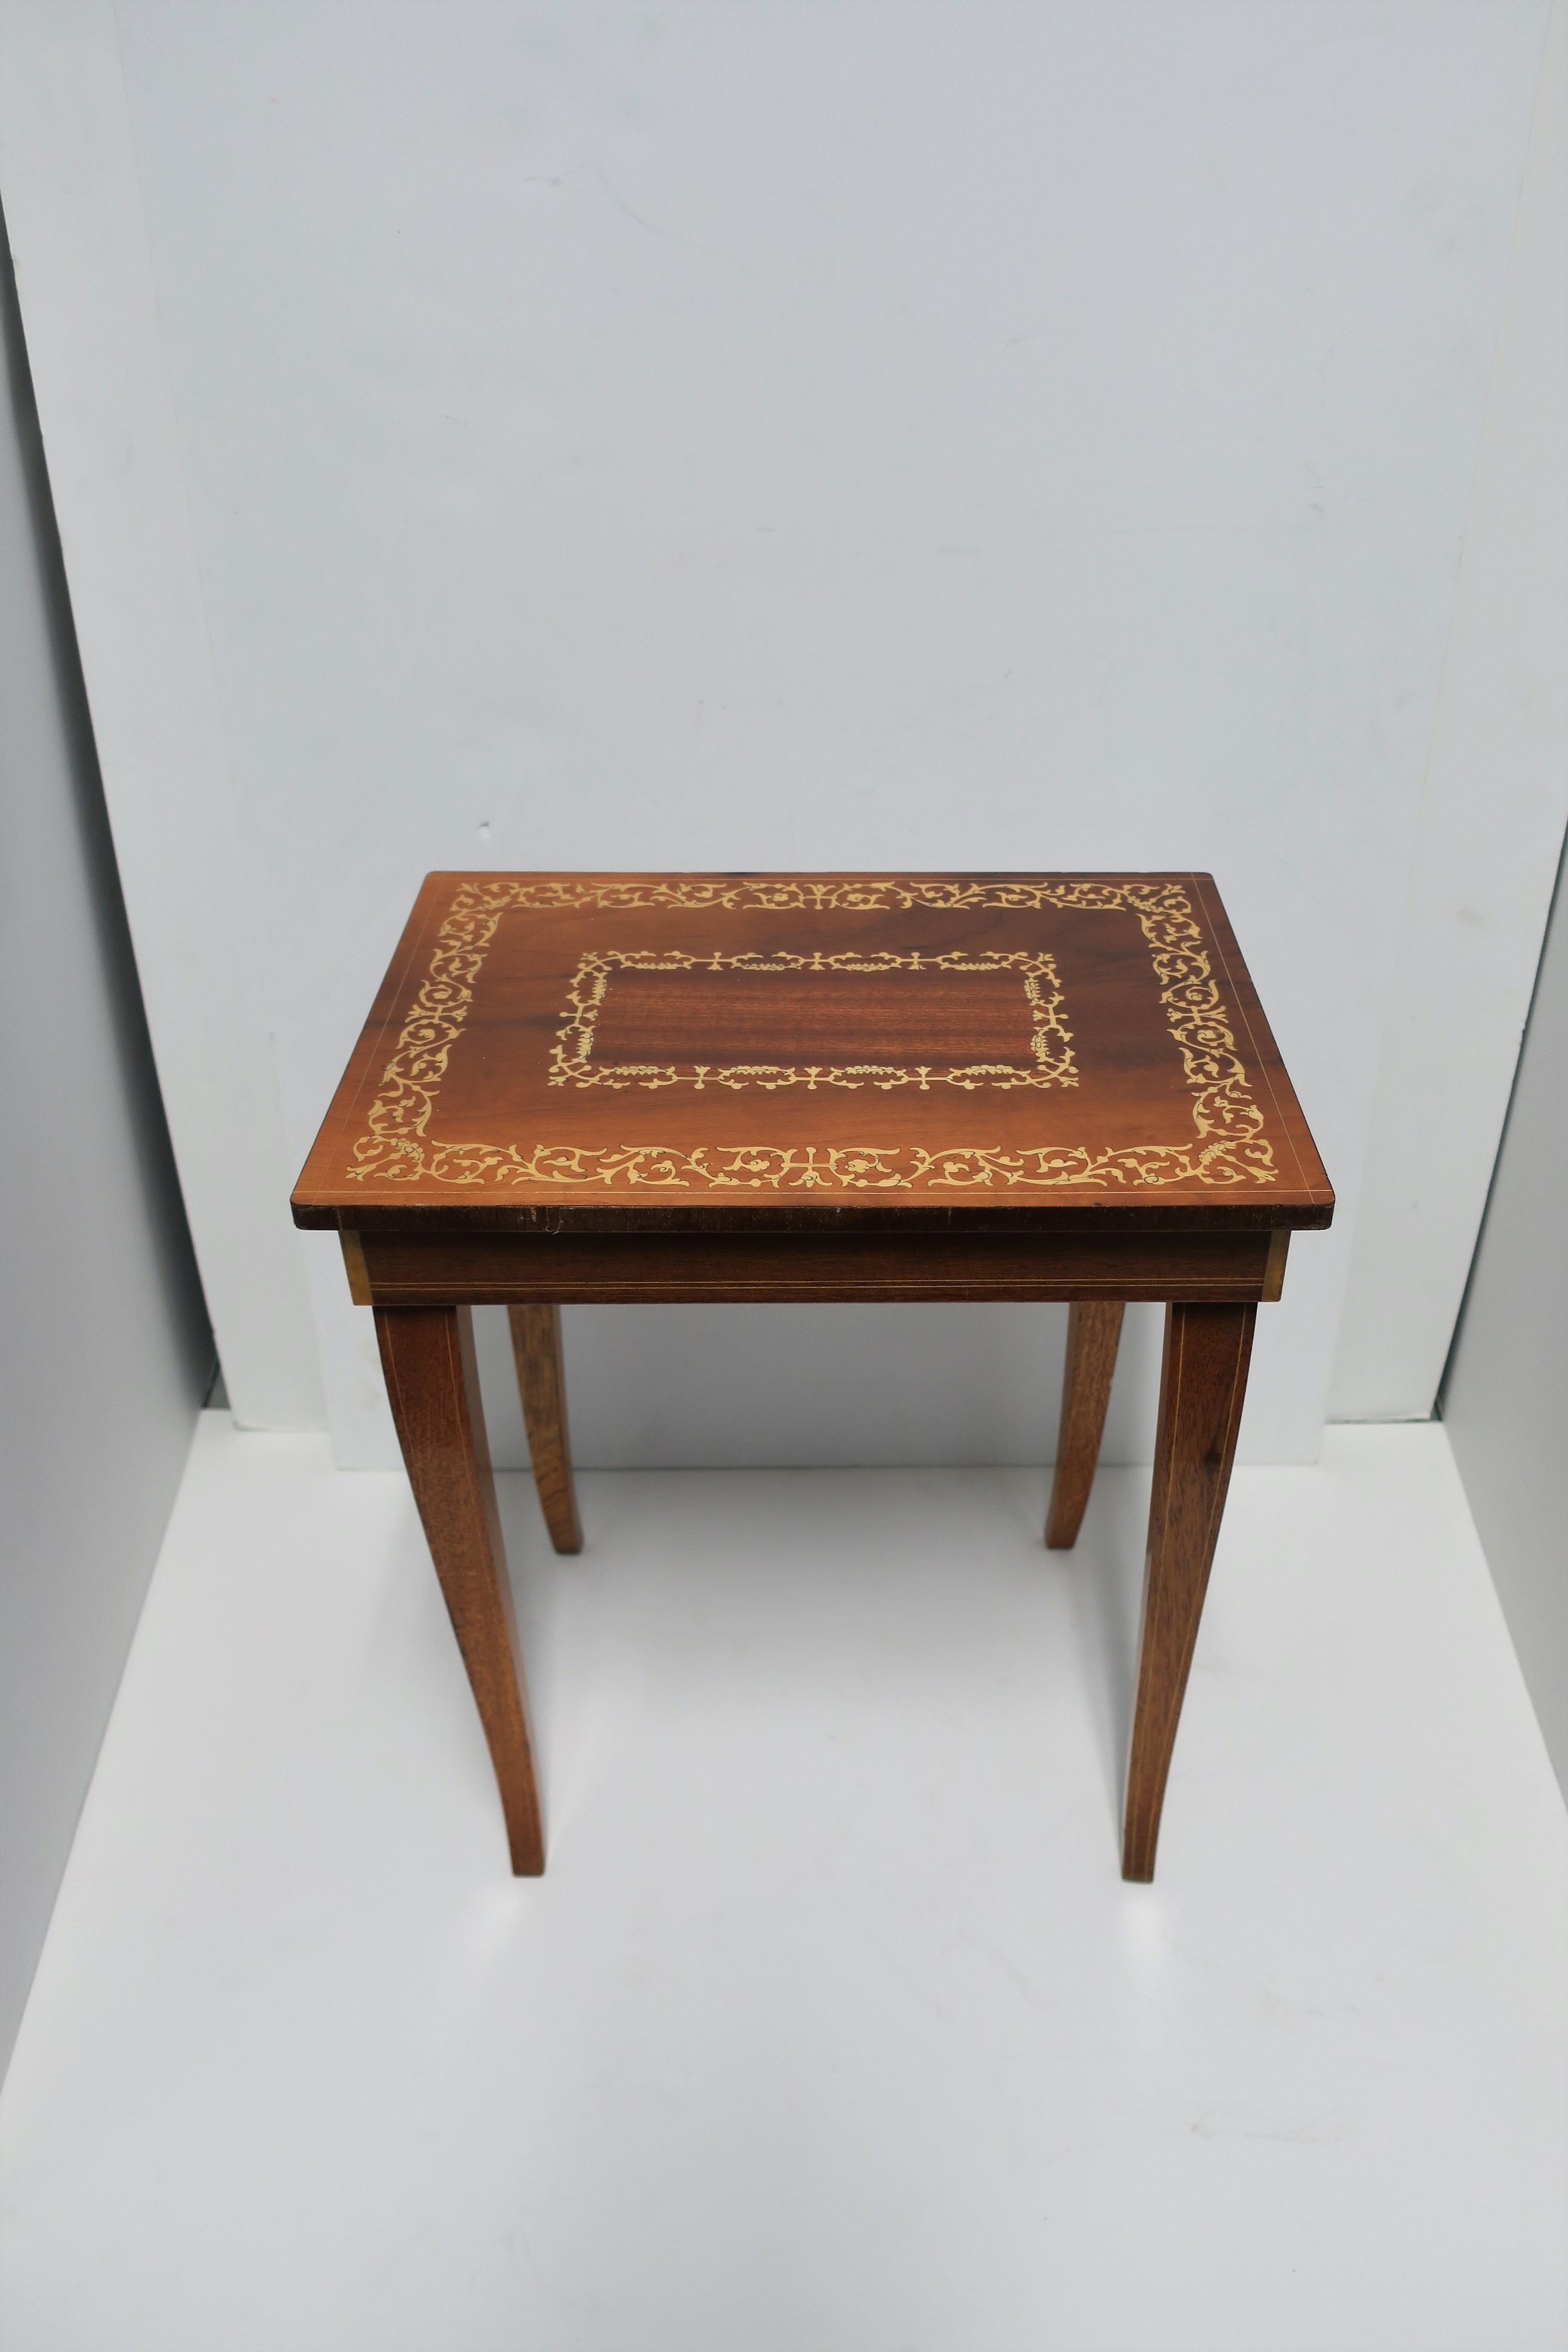 A small Italian rectangular wood side or end table with decorative top, cabriolet legs, private compartment and music box, in the Rococo style, circa 20th century, Italy. This convenient side or end table also doubles as a 'box' and 'music' box;